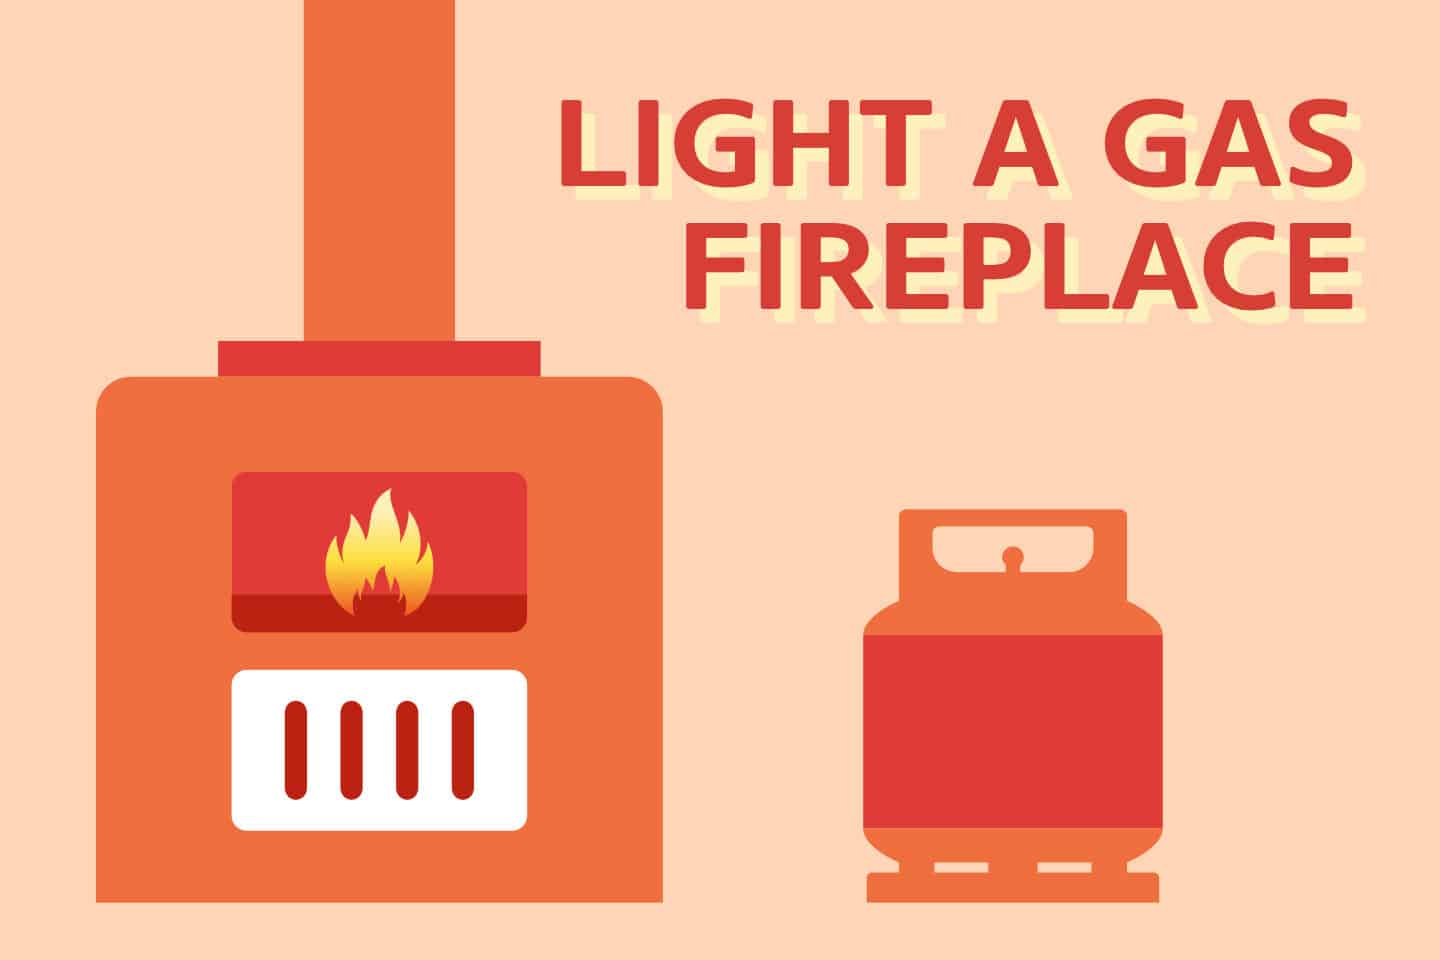 How To Light A Gas Fireplace In 7 Minutes (OR LESS)